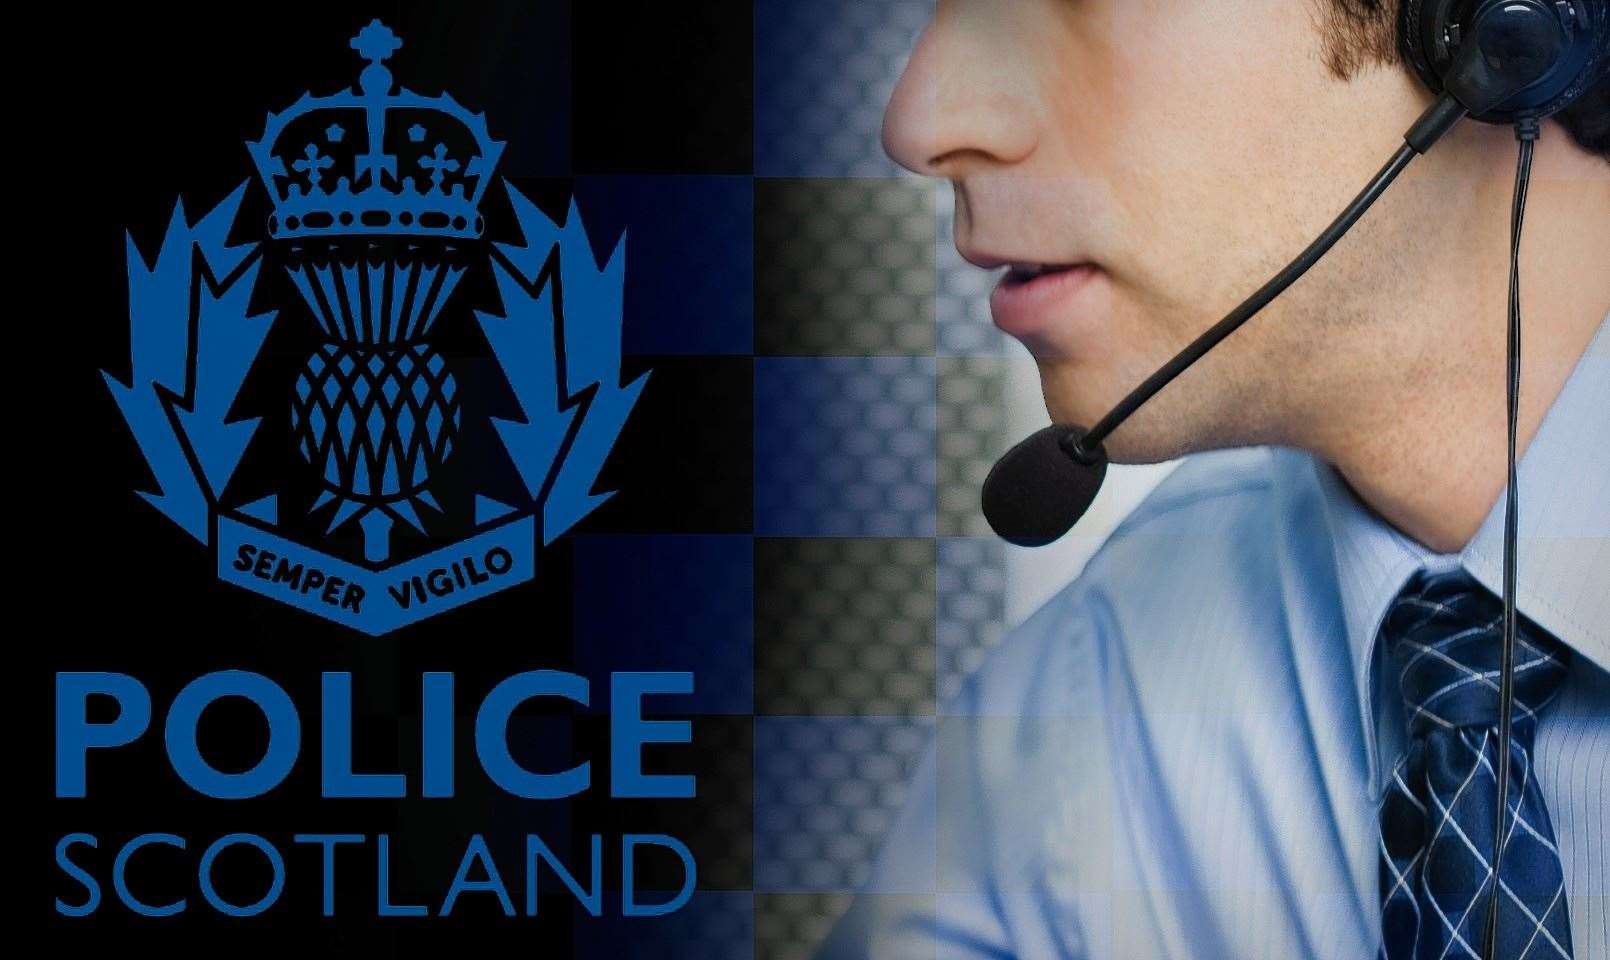 Police Scotland investigate after the discovery of a man's body.